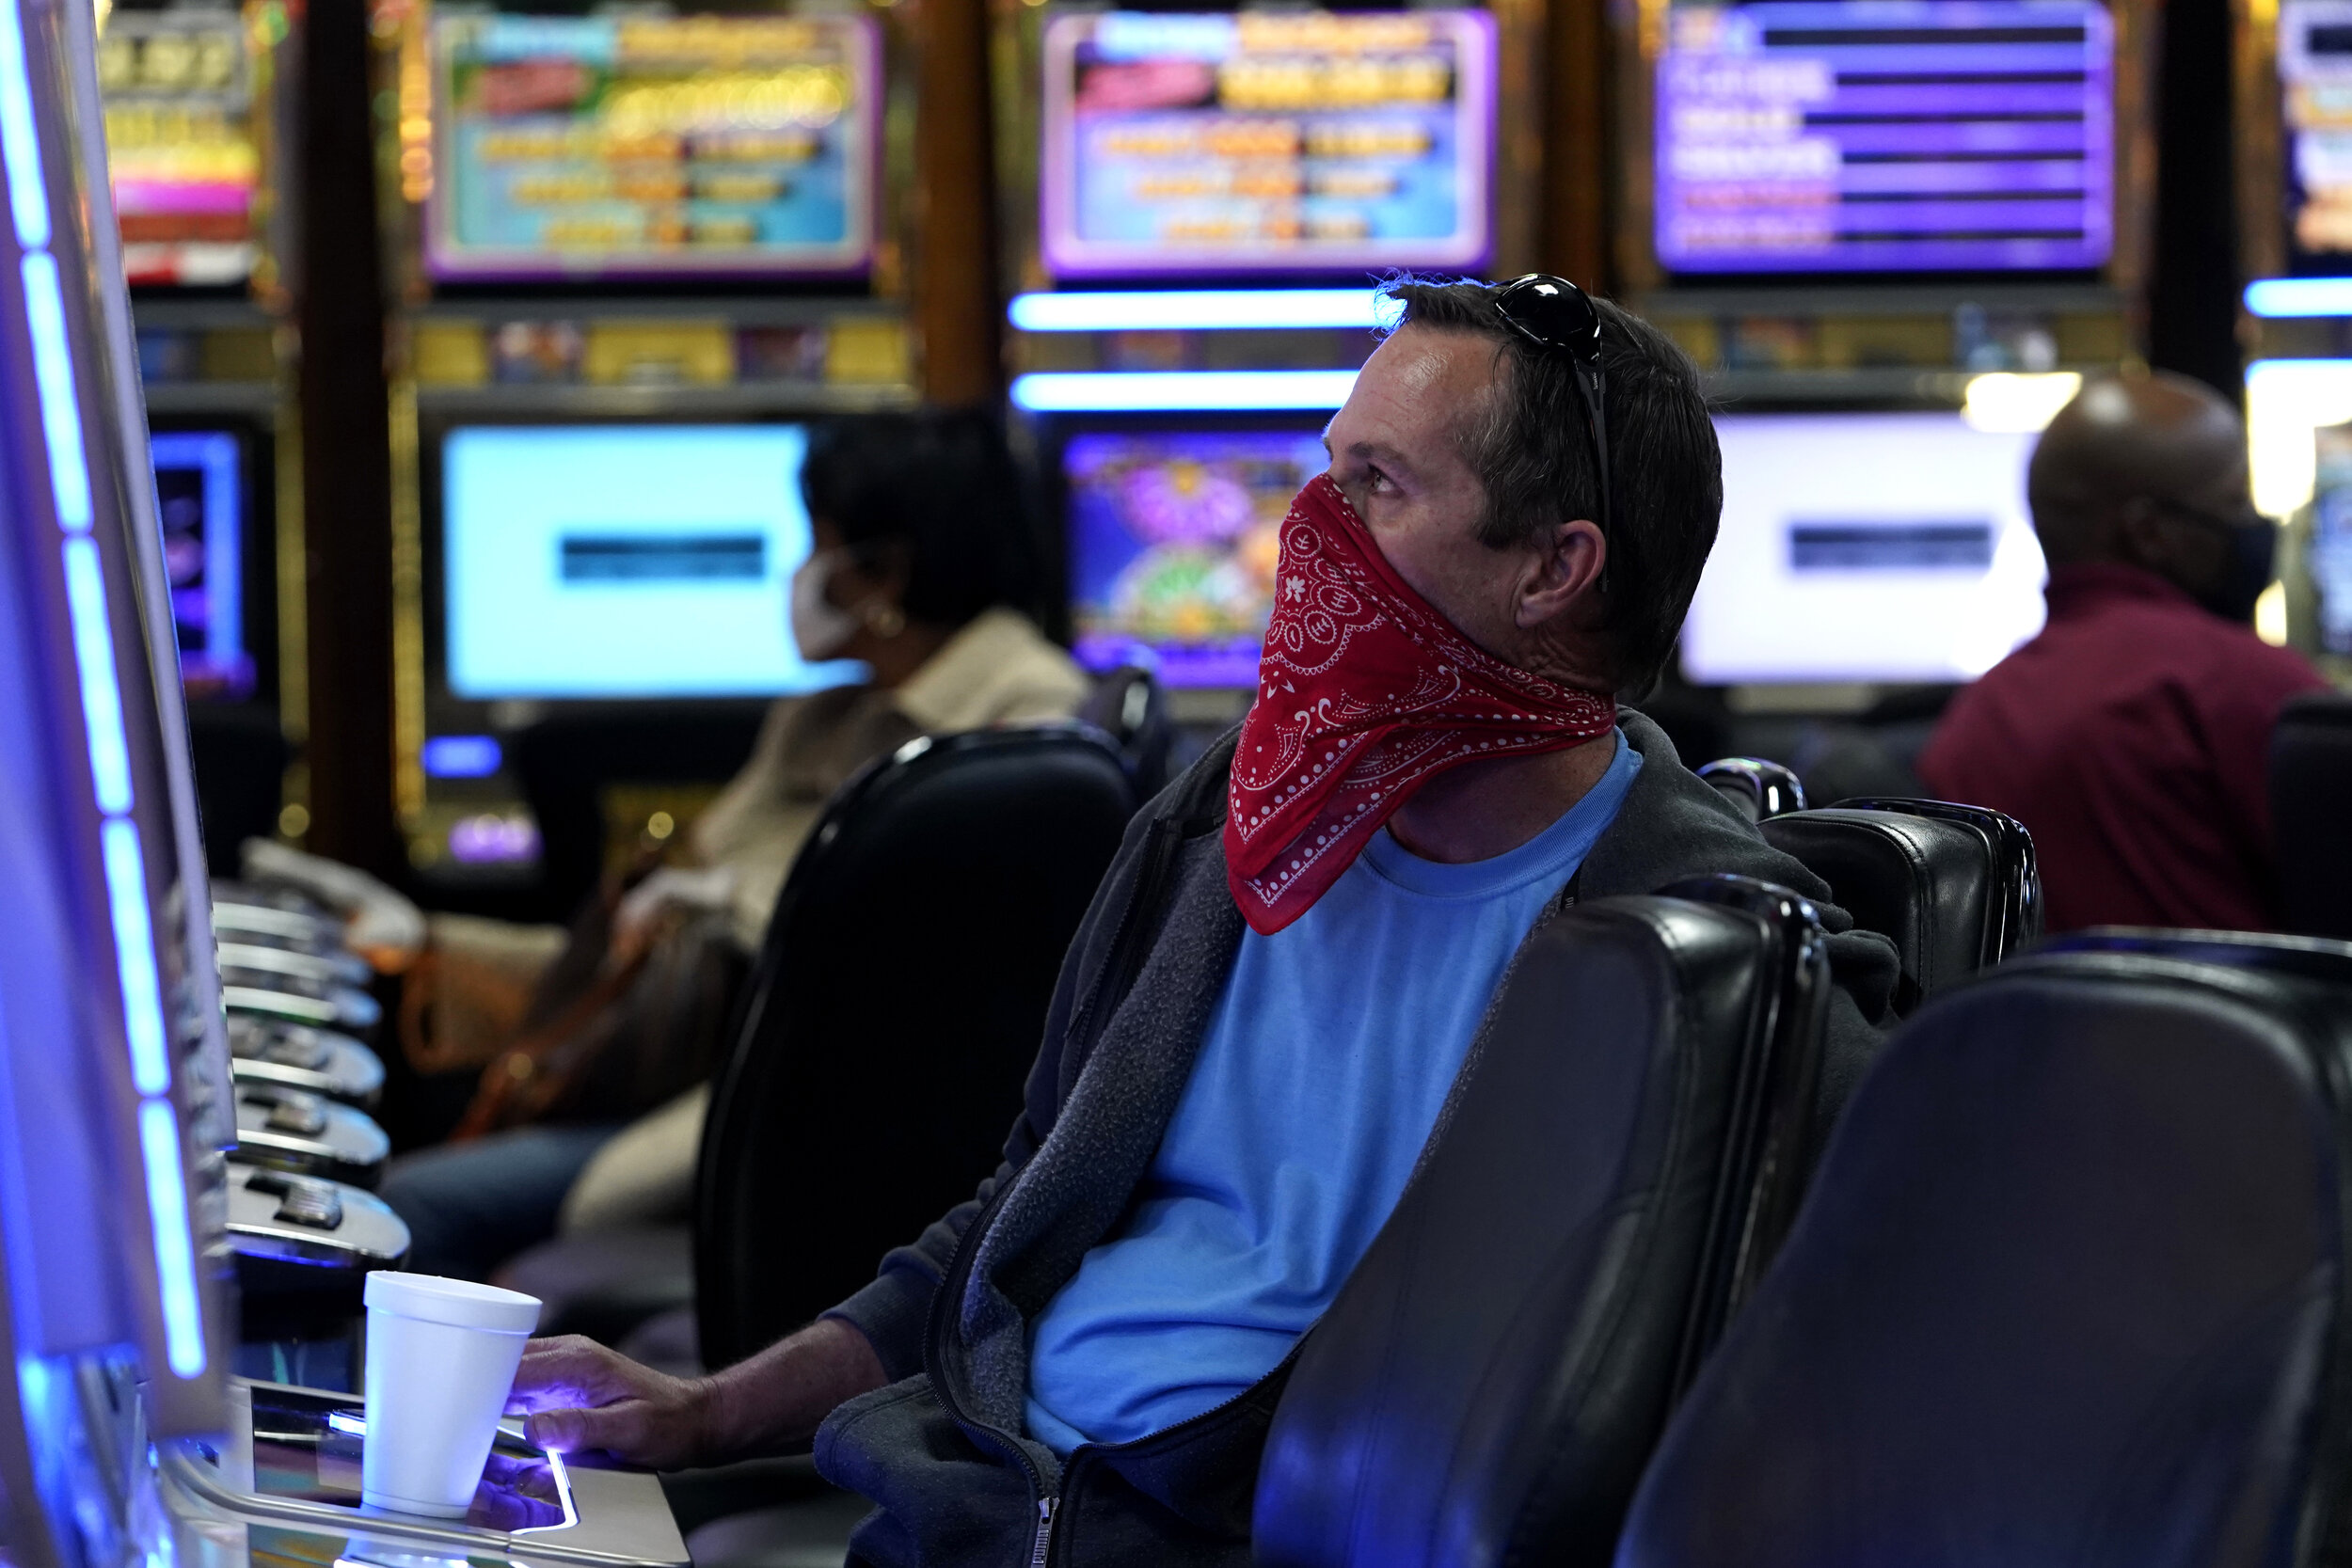  A man wearing a bandana plays a slot machine at the recently reopened Lucky Star Casino amid the spread of the coronavirus disease (COVID-19), in El Reno, Oklahoma, U.S. May 20, 2020. REUTERS/Nick Oxford 